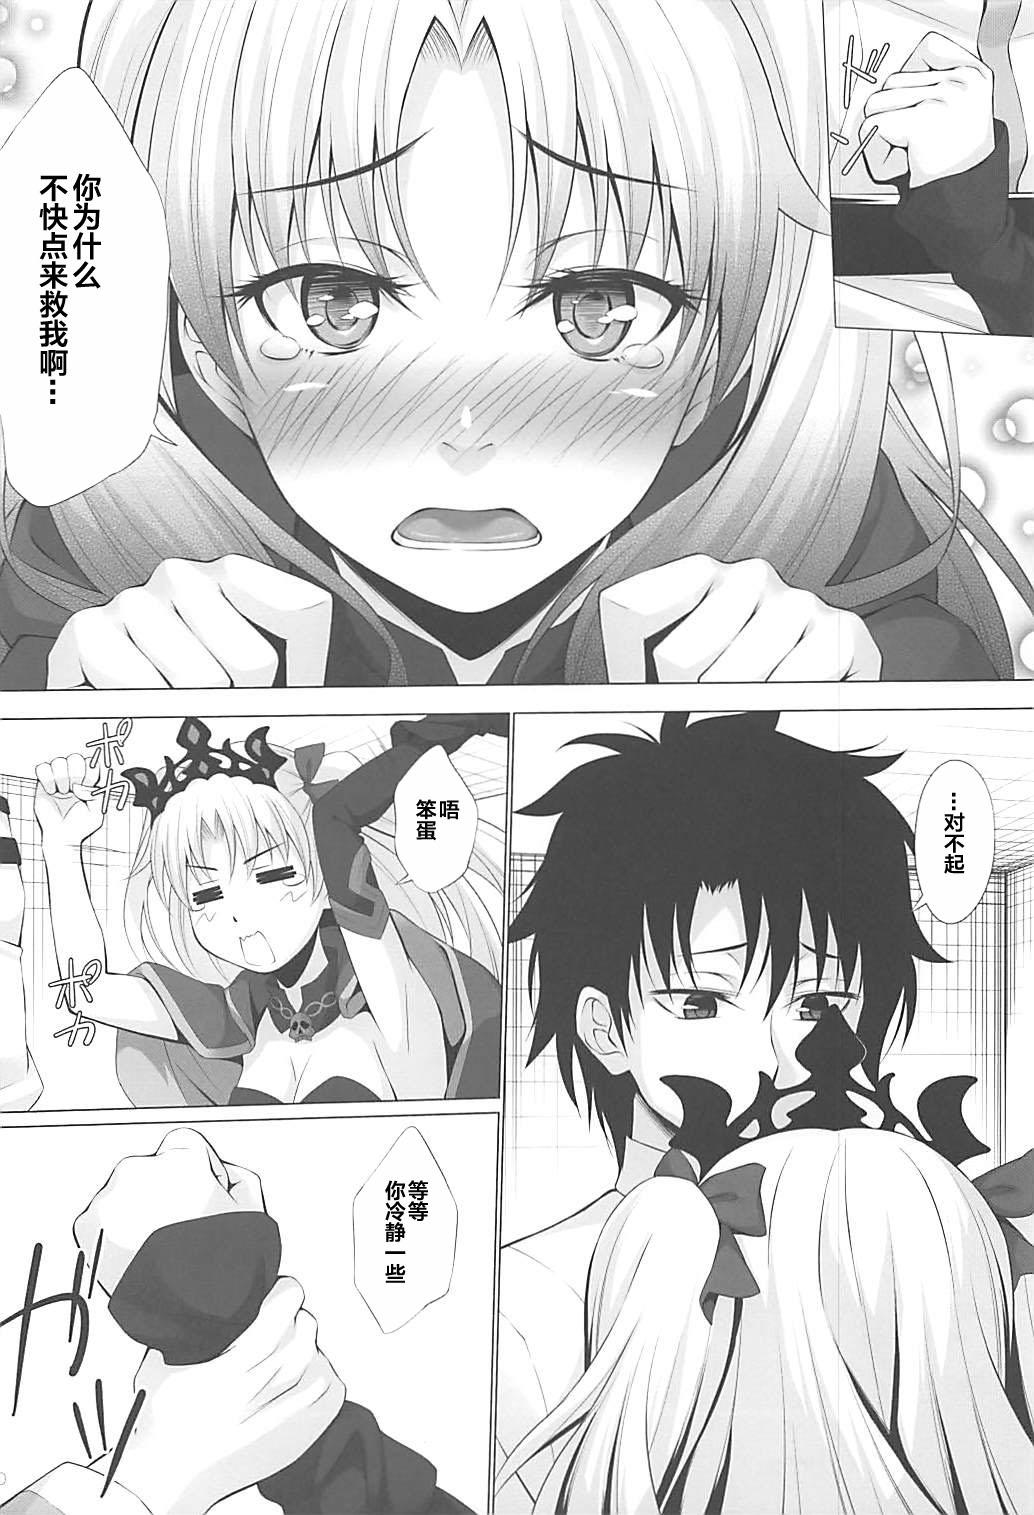 Sologirl HELP ME... - Fate grand order Lez - Page 8